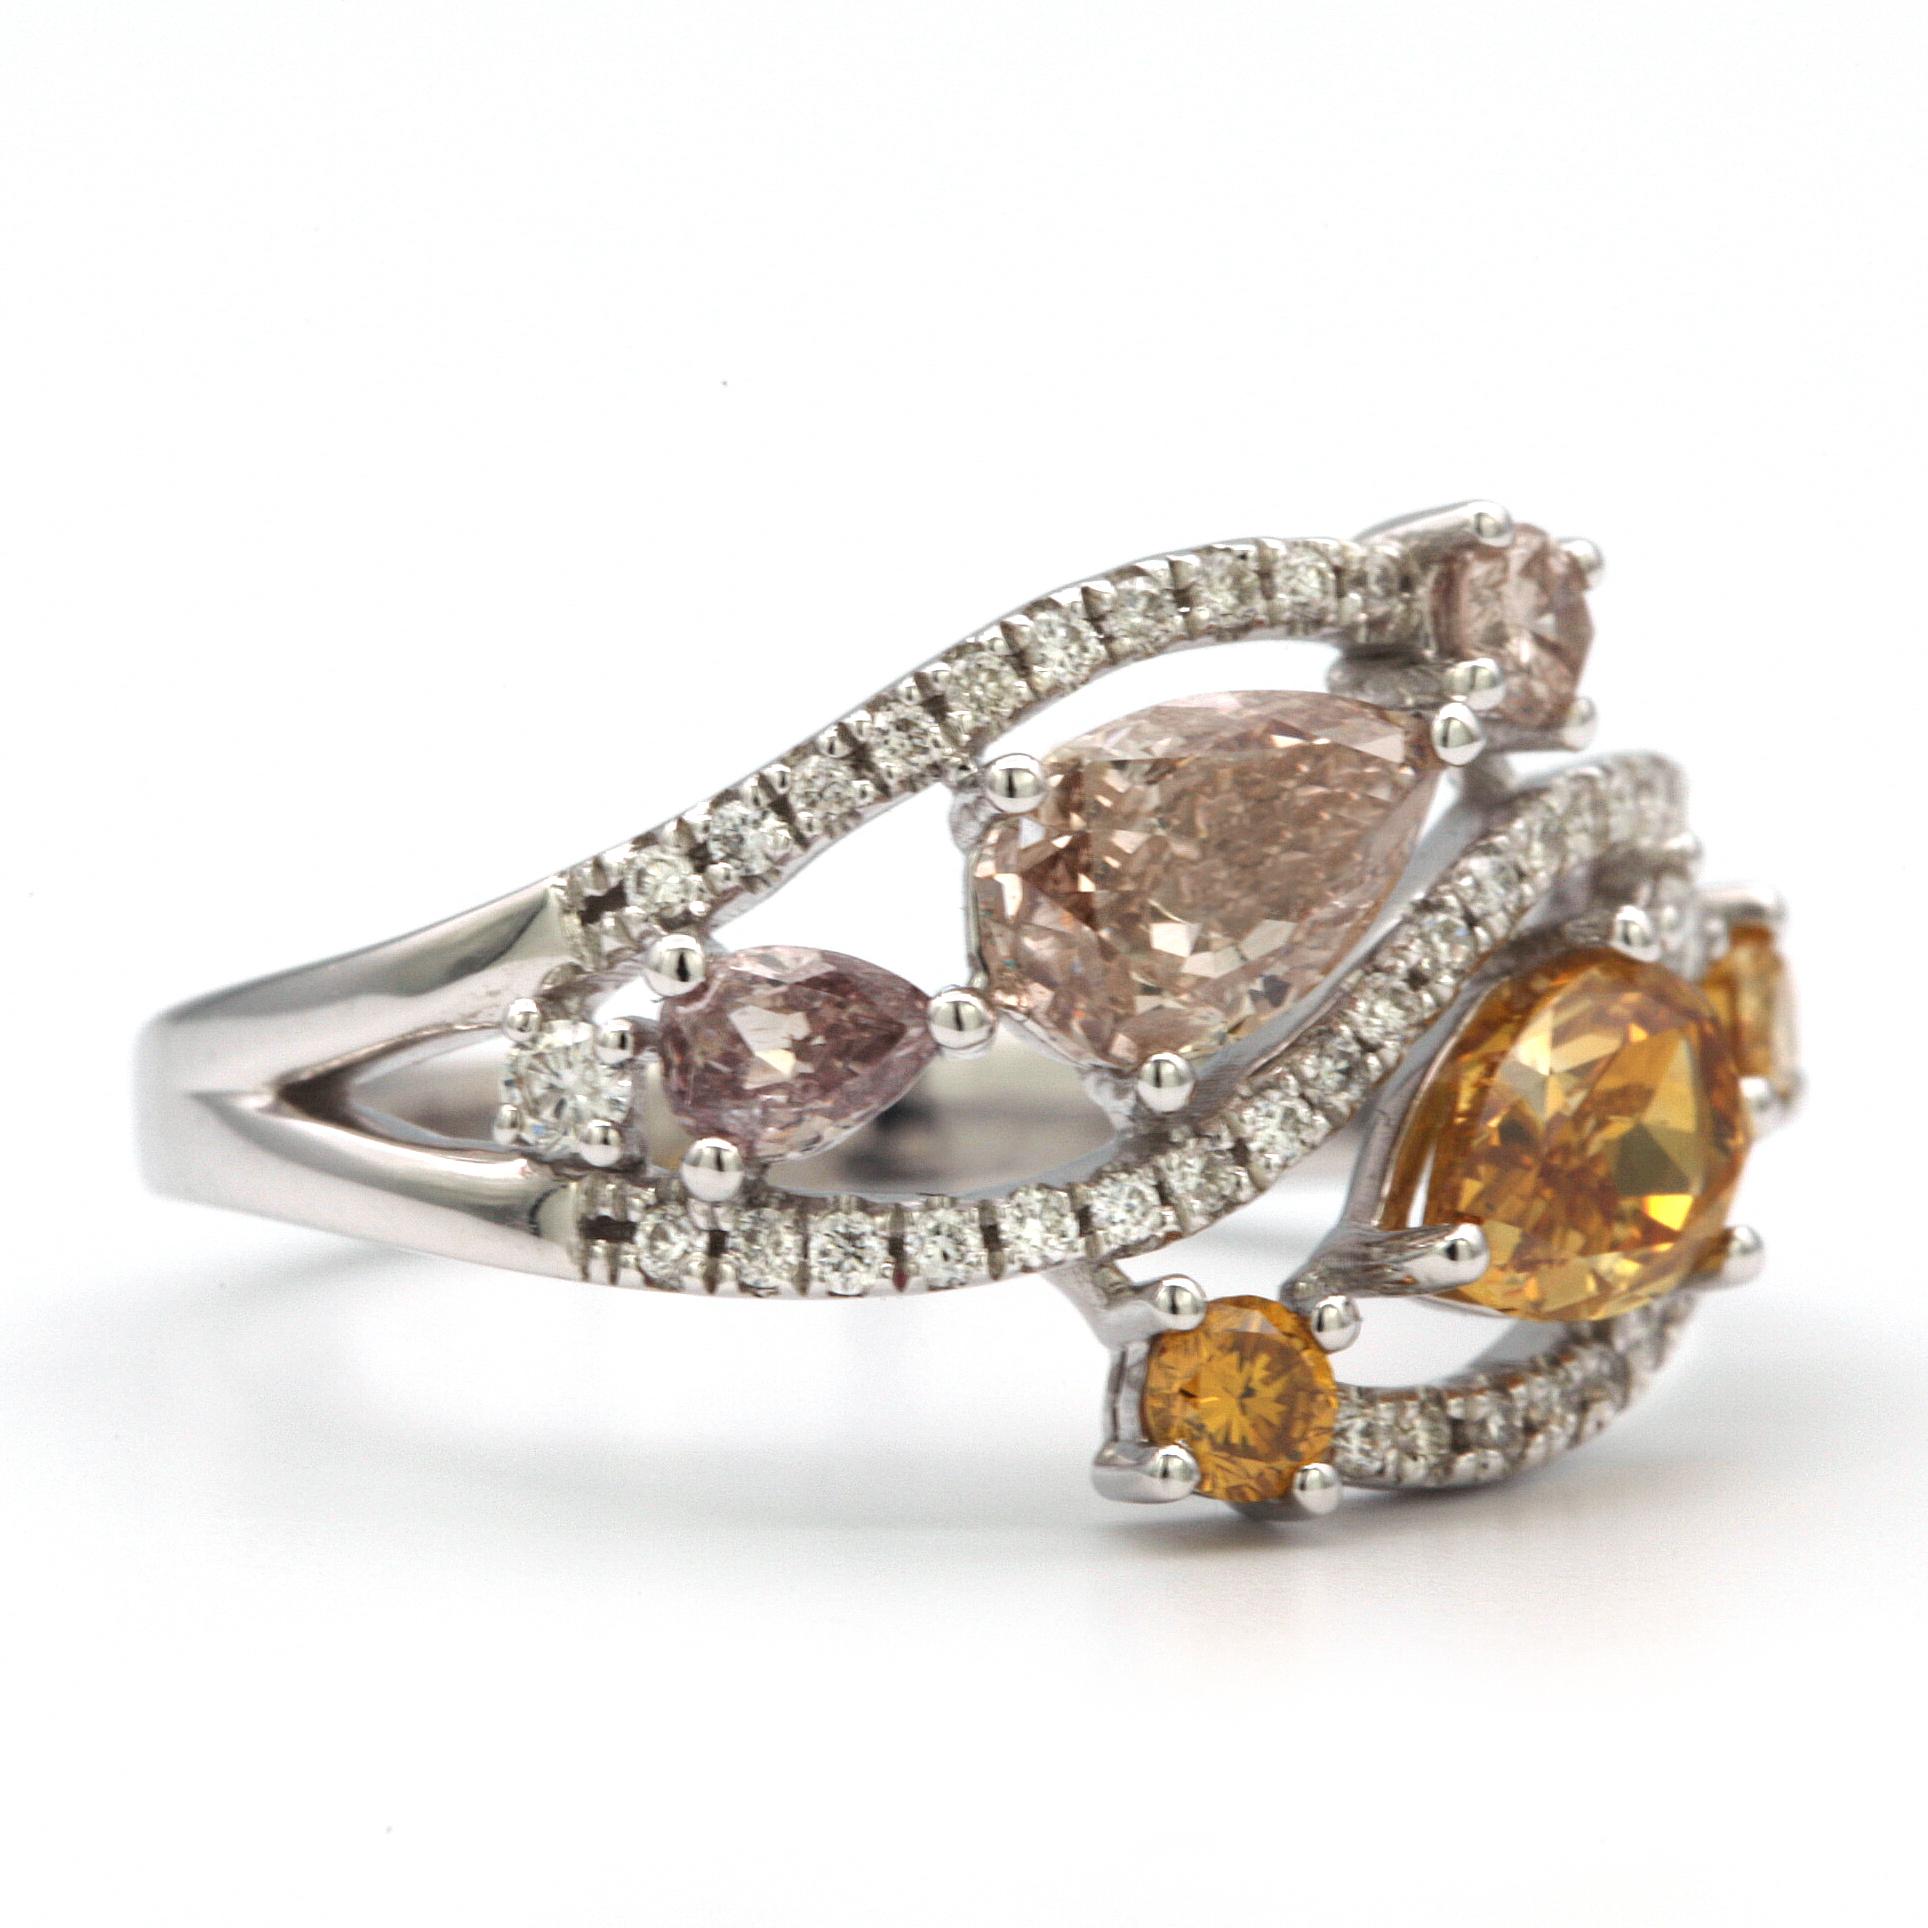 This beautiful ring features two Pear shaped stones, one being approx. 0.51ct Fancy Deep Orangy Yellow SI1/SI2, the other being 0.50ct  Light Brown  I1.
Two smaller Pear shaped stones in the ring are approx. 0.17ct , one being Fancy Light Purplish,